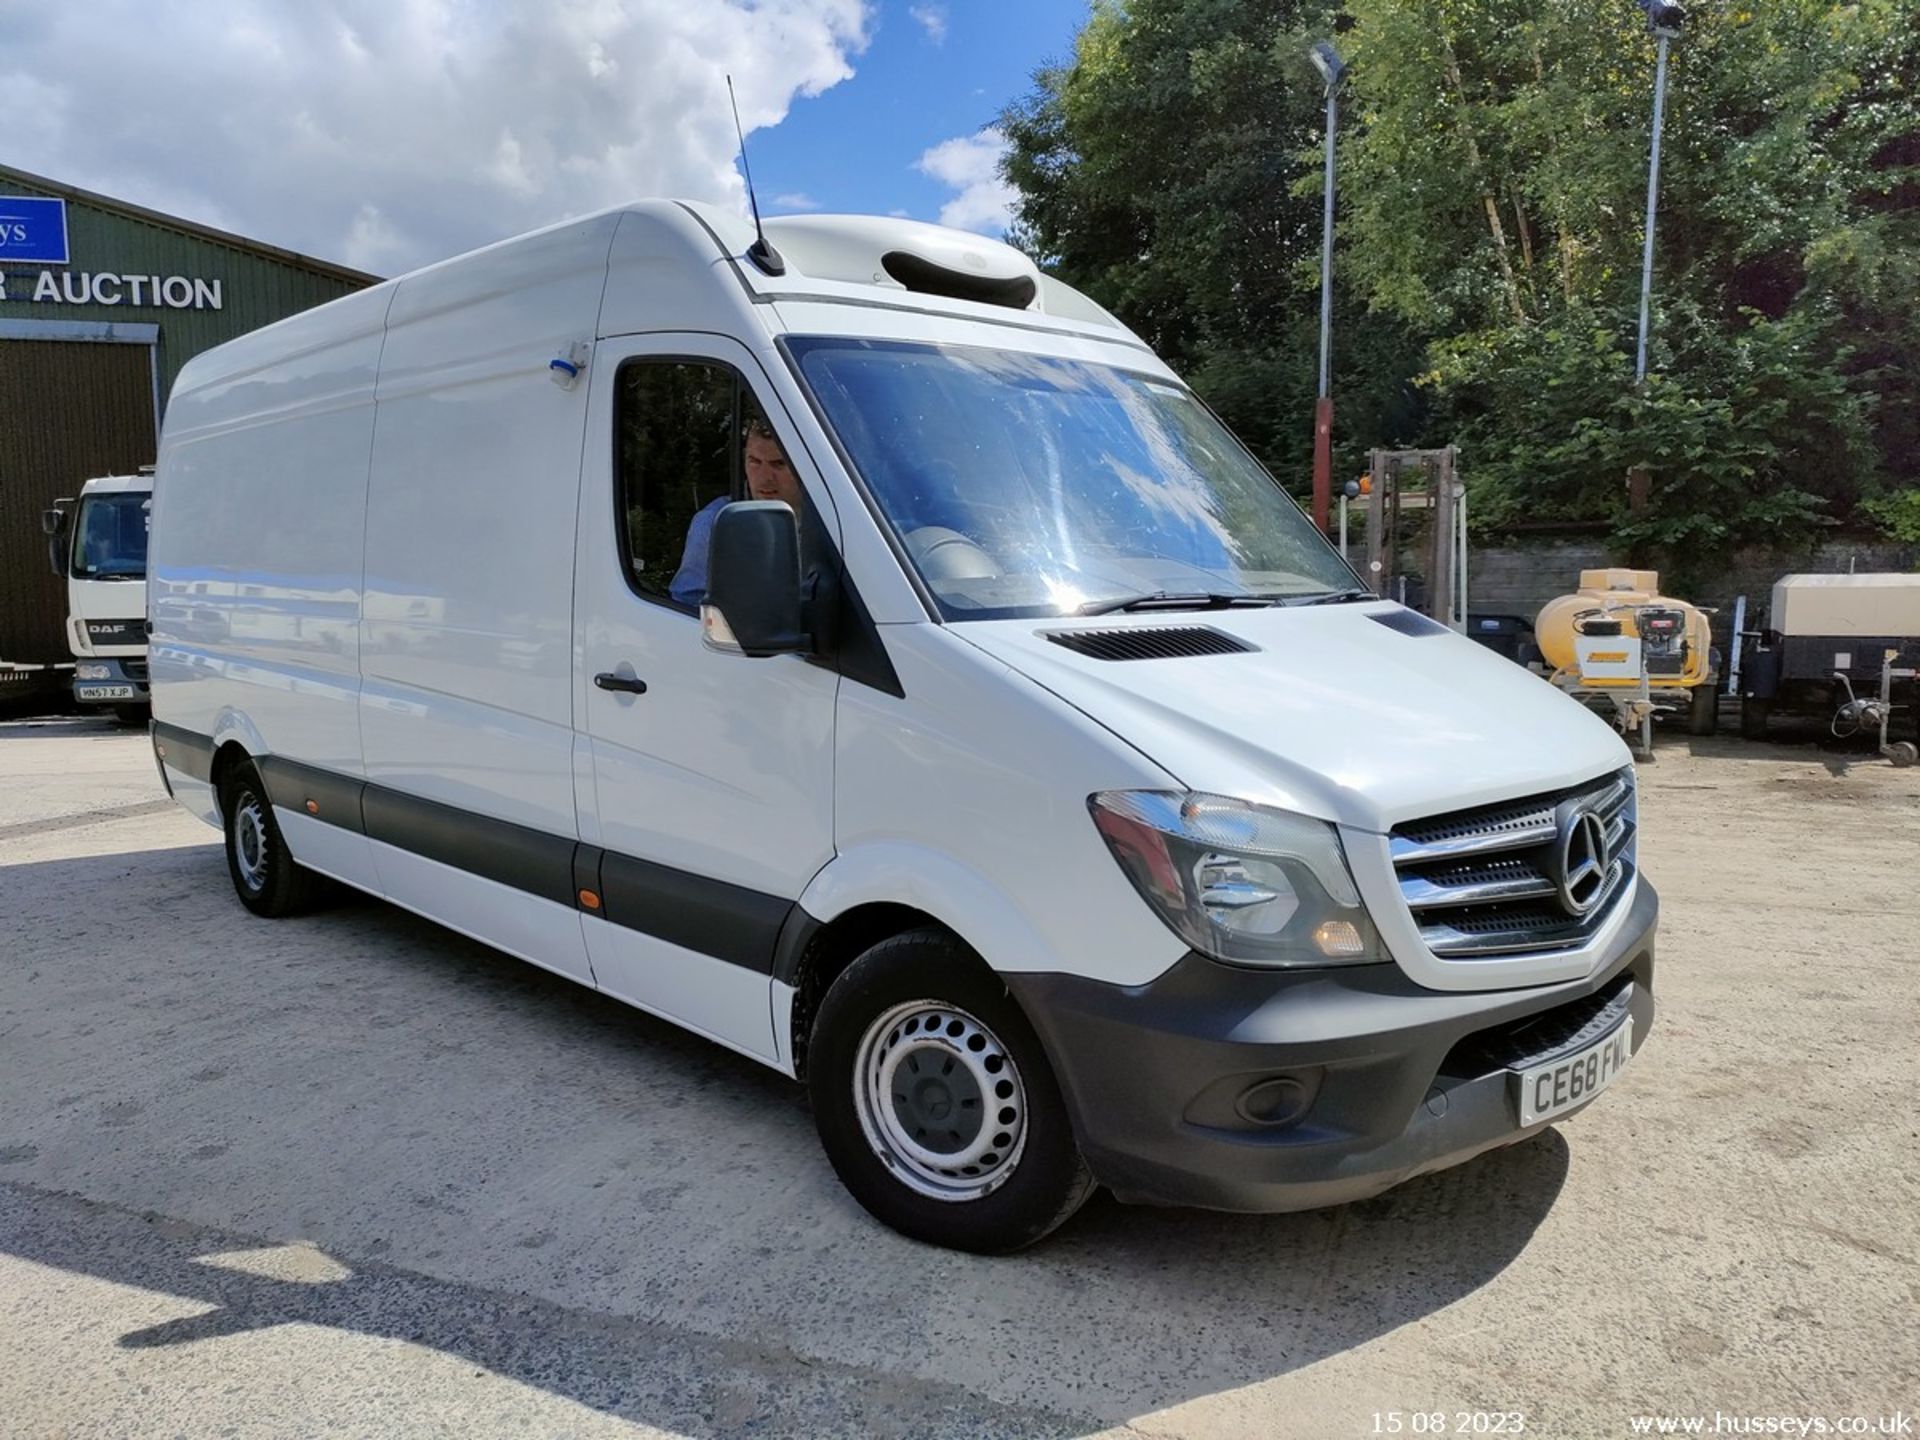 18/68 MERCEDES-BENZ SPRINTER 314CDI - 2143cc 5dr Refrigerated (White) - Image 12 of 40